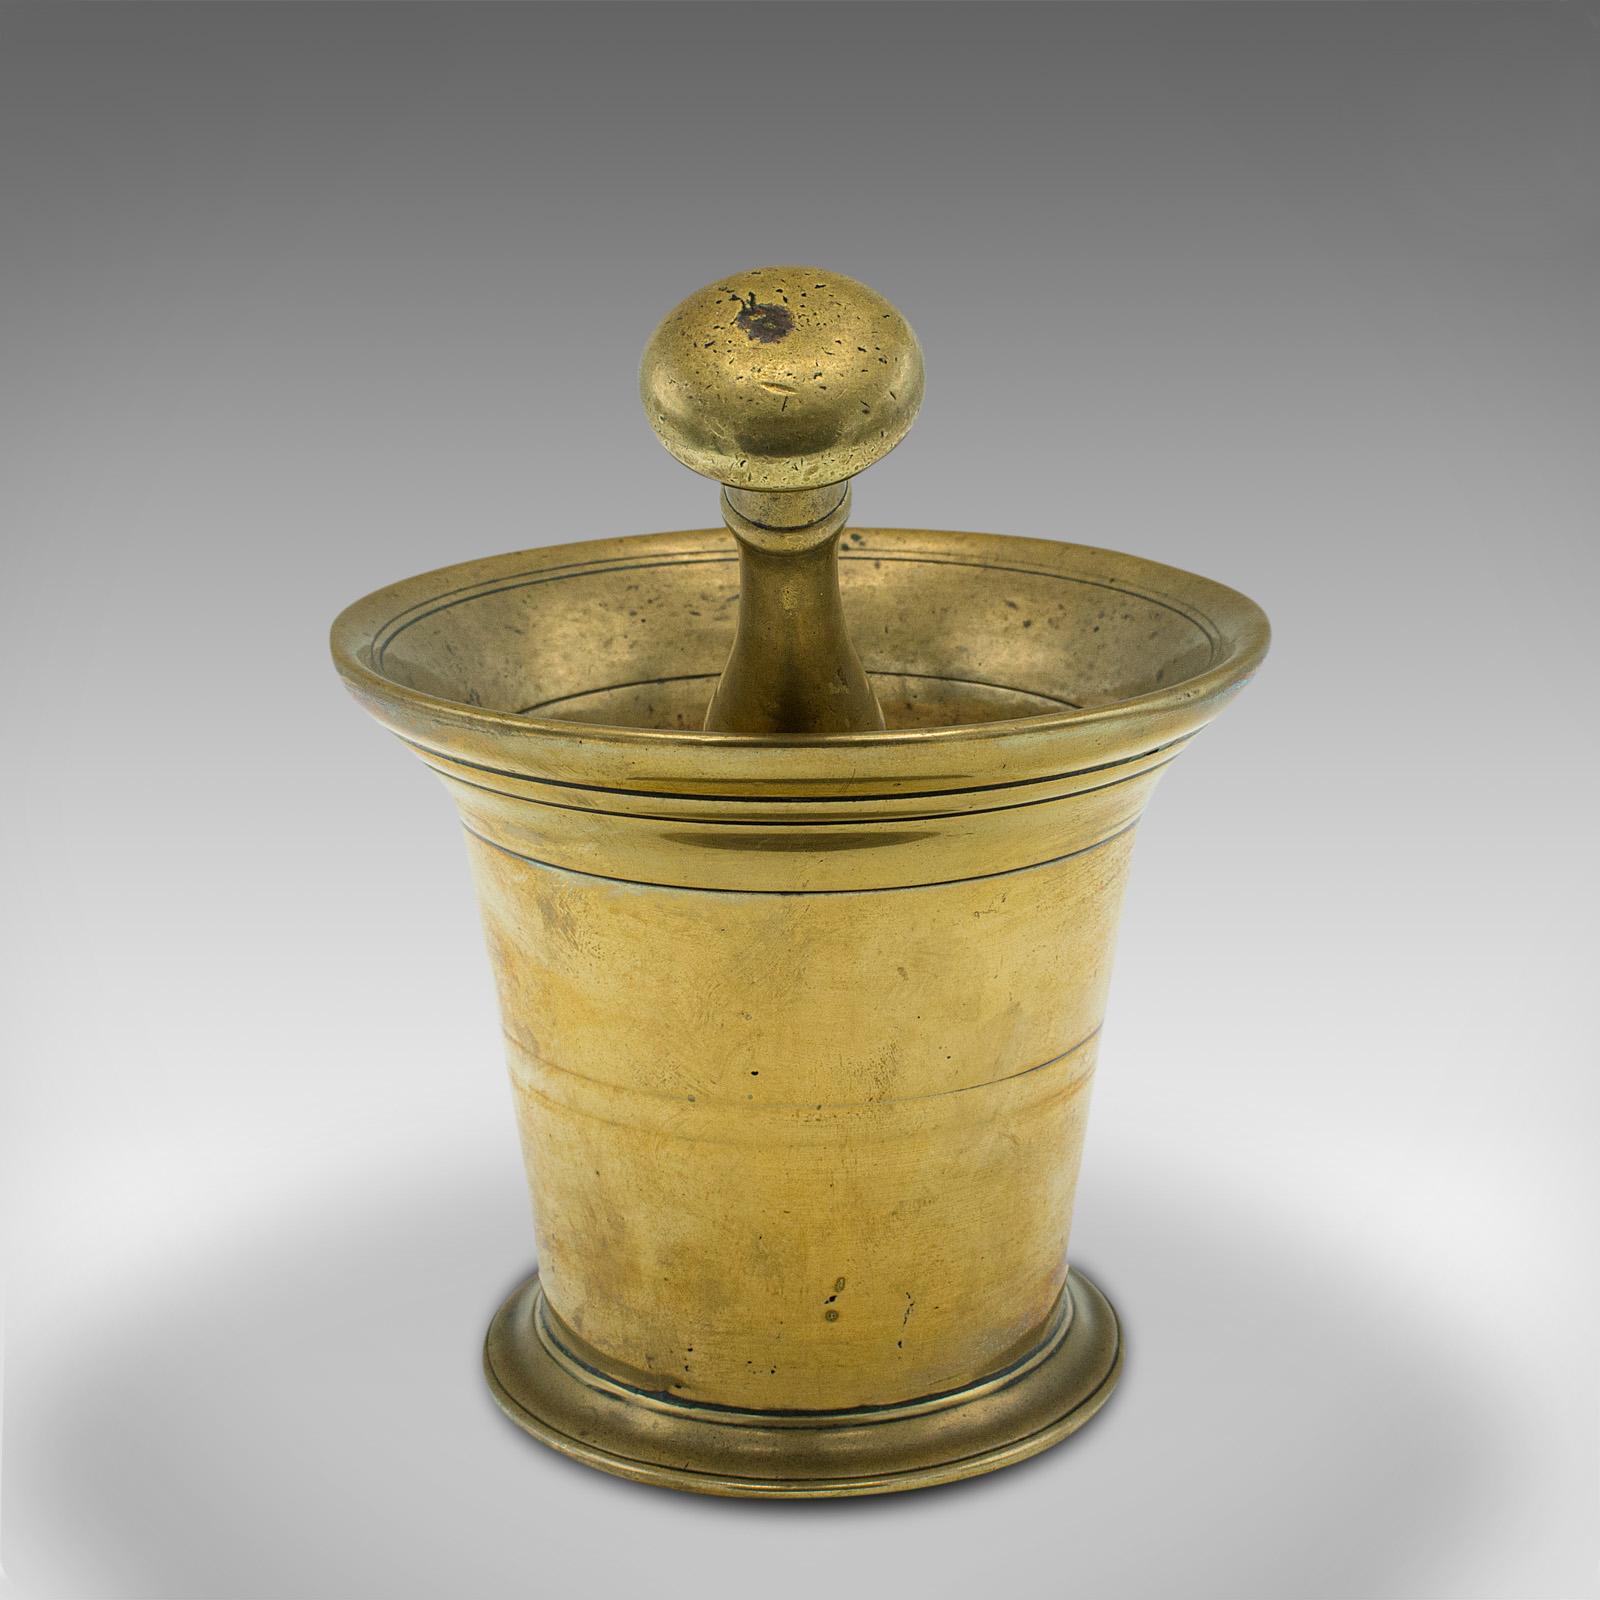 British Antique Apothecary Mortar and Pestle, English, Brass, Chemist, Victorian, C.1850 For Sale